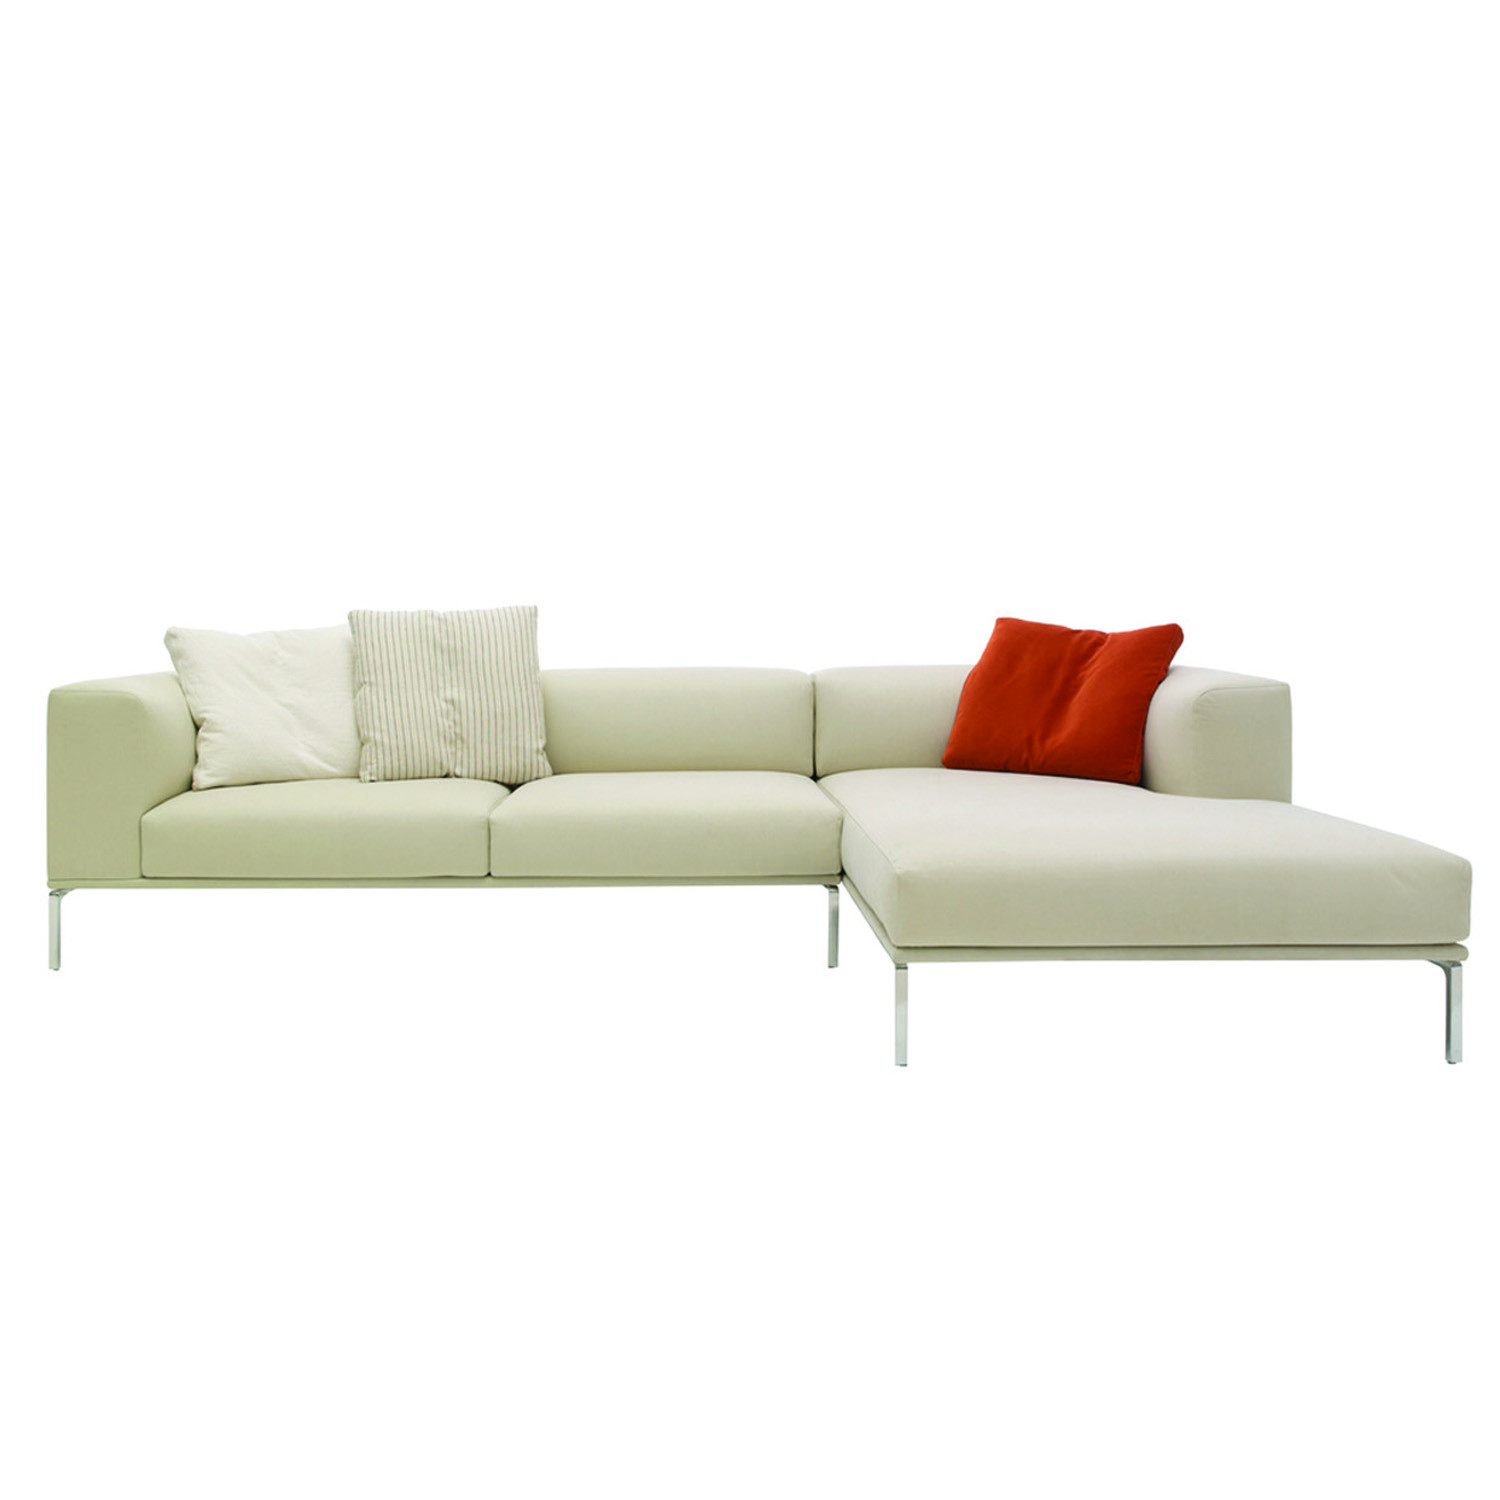 191 Moov Sofa with chaise